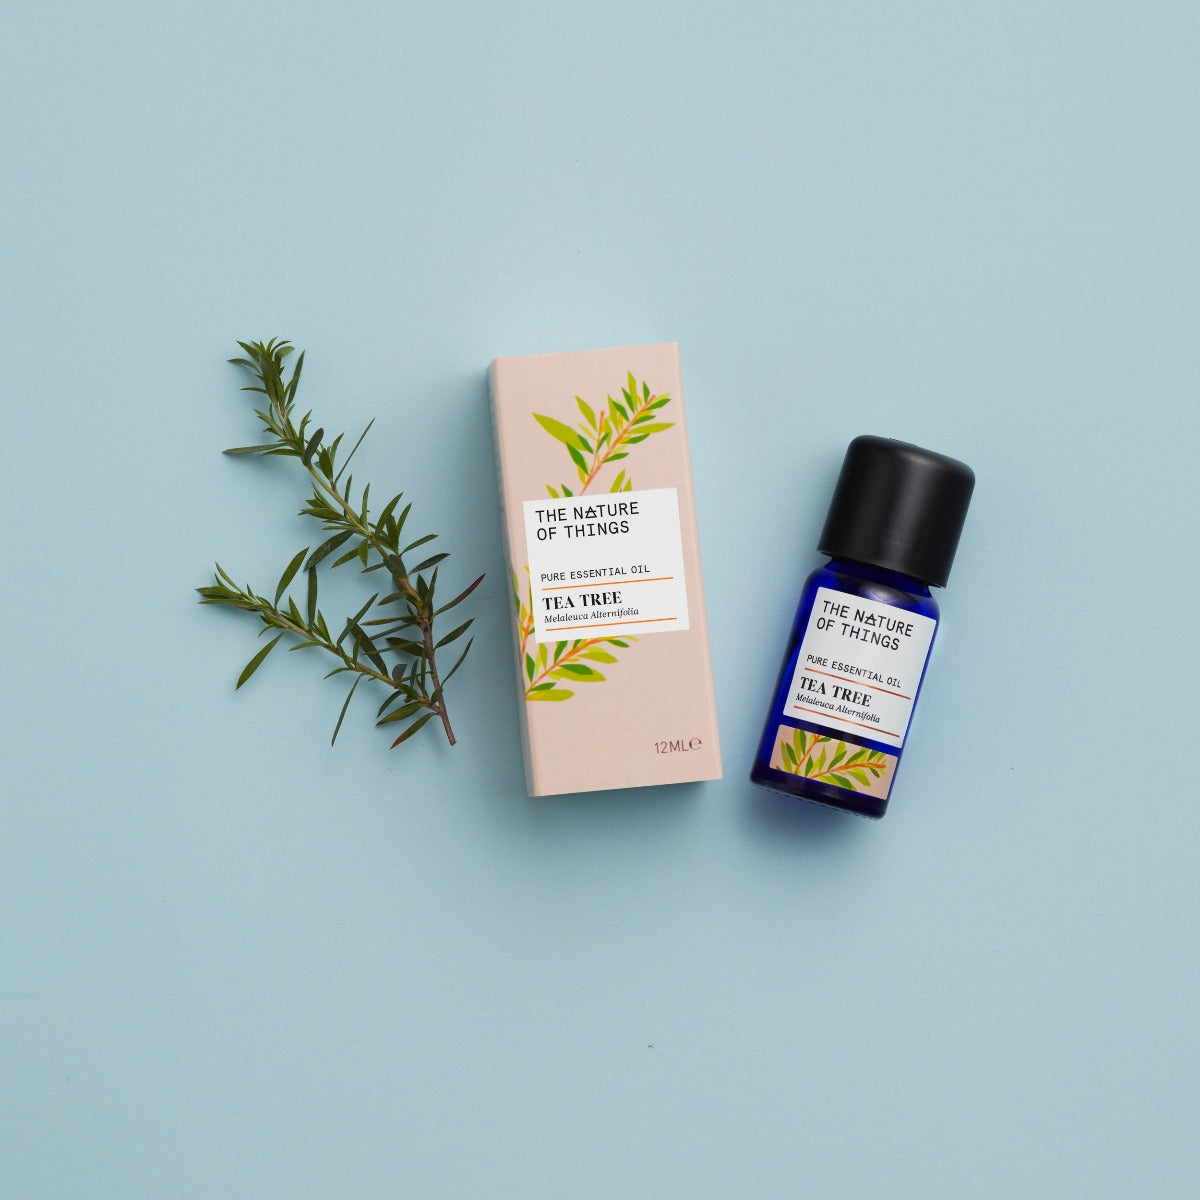 Tea Tree Essential Oil from The Nature of Things